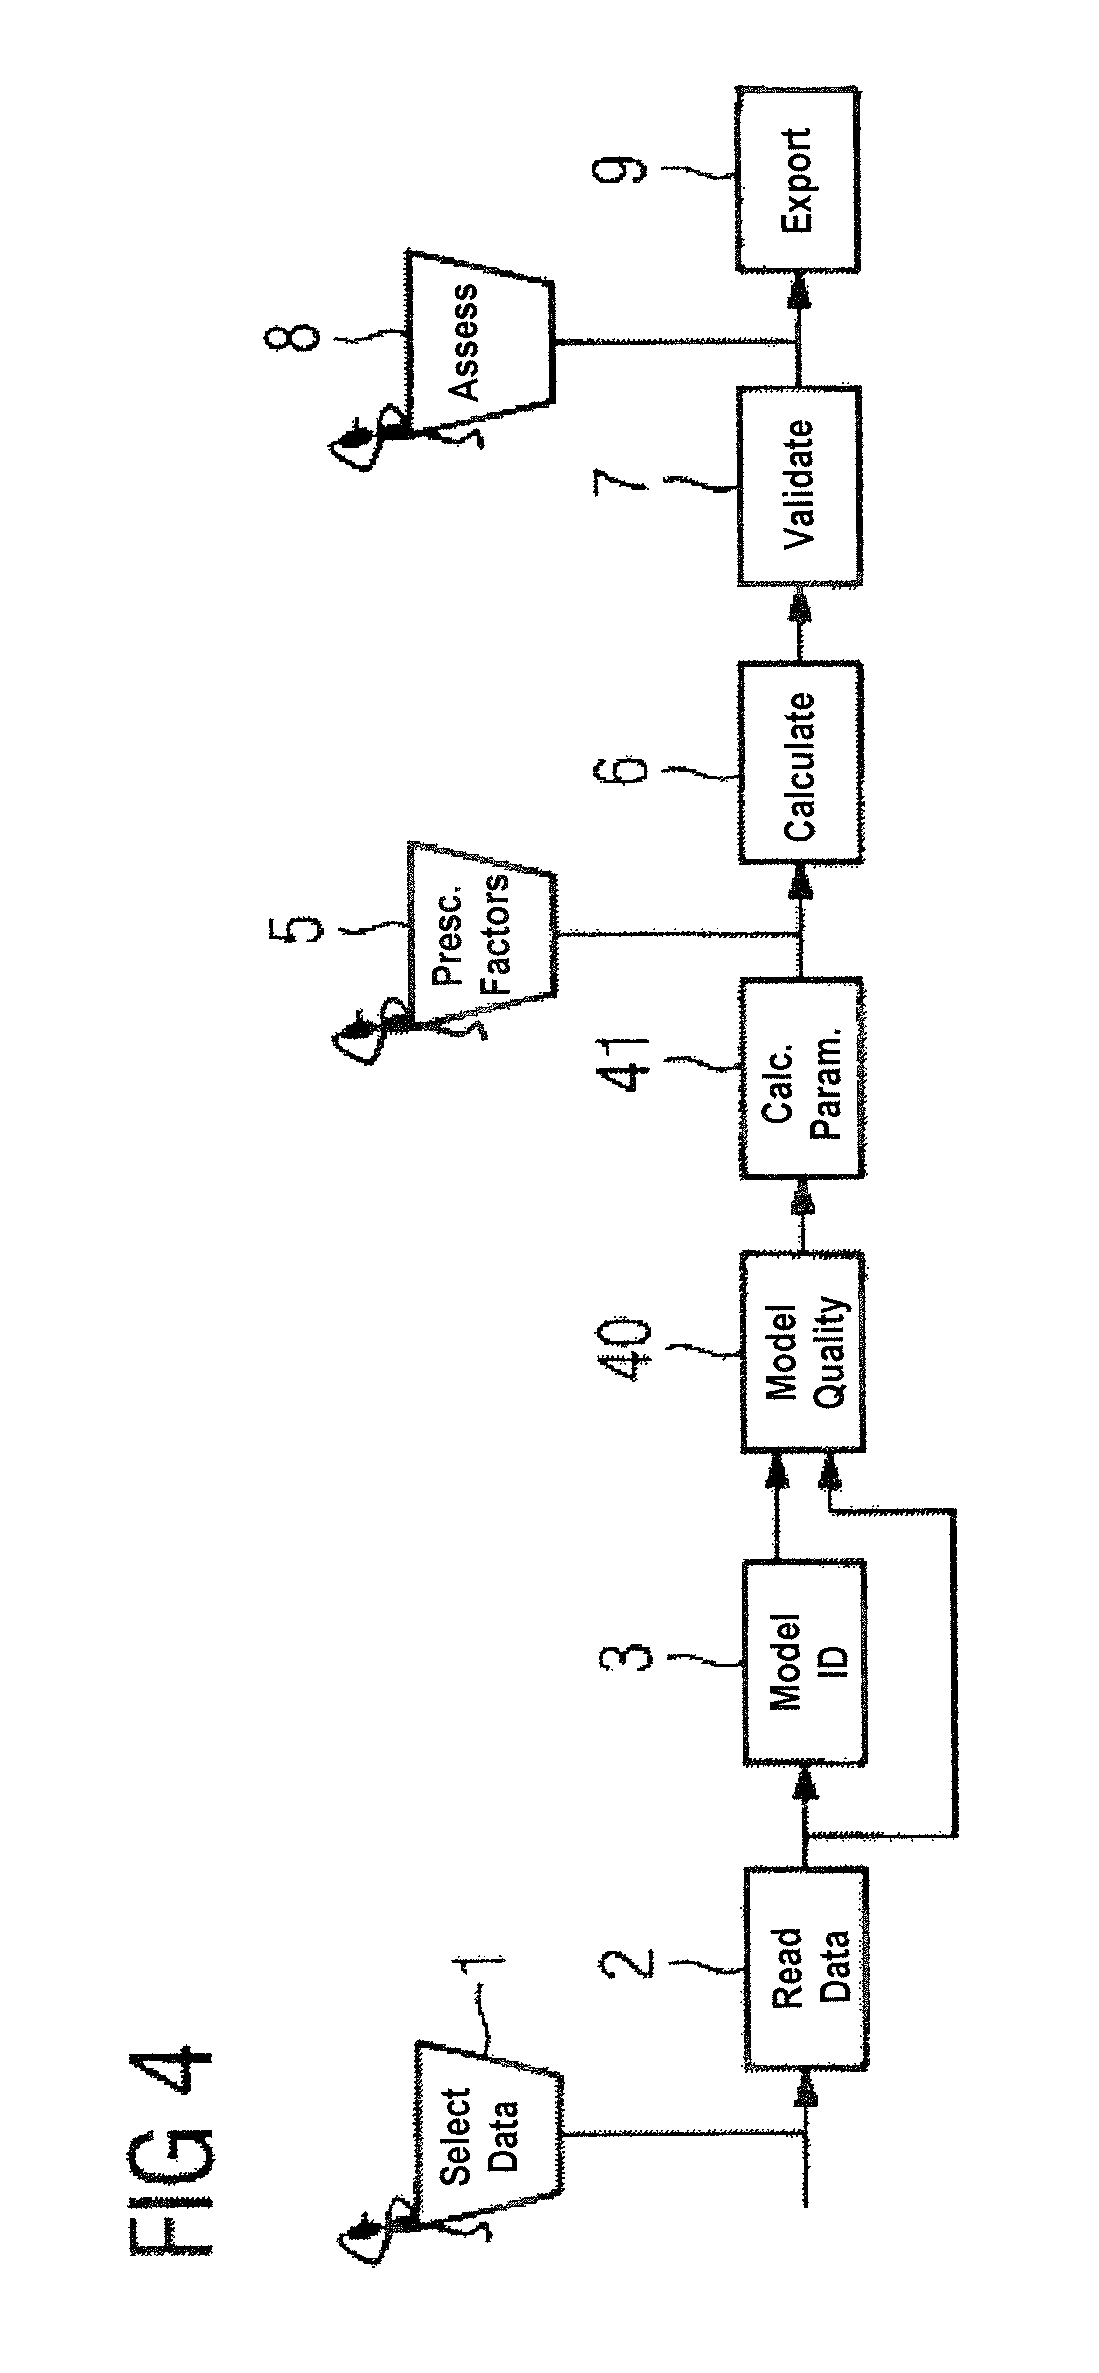 Engineering tool and method for parameterizing a model-based predictive controller